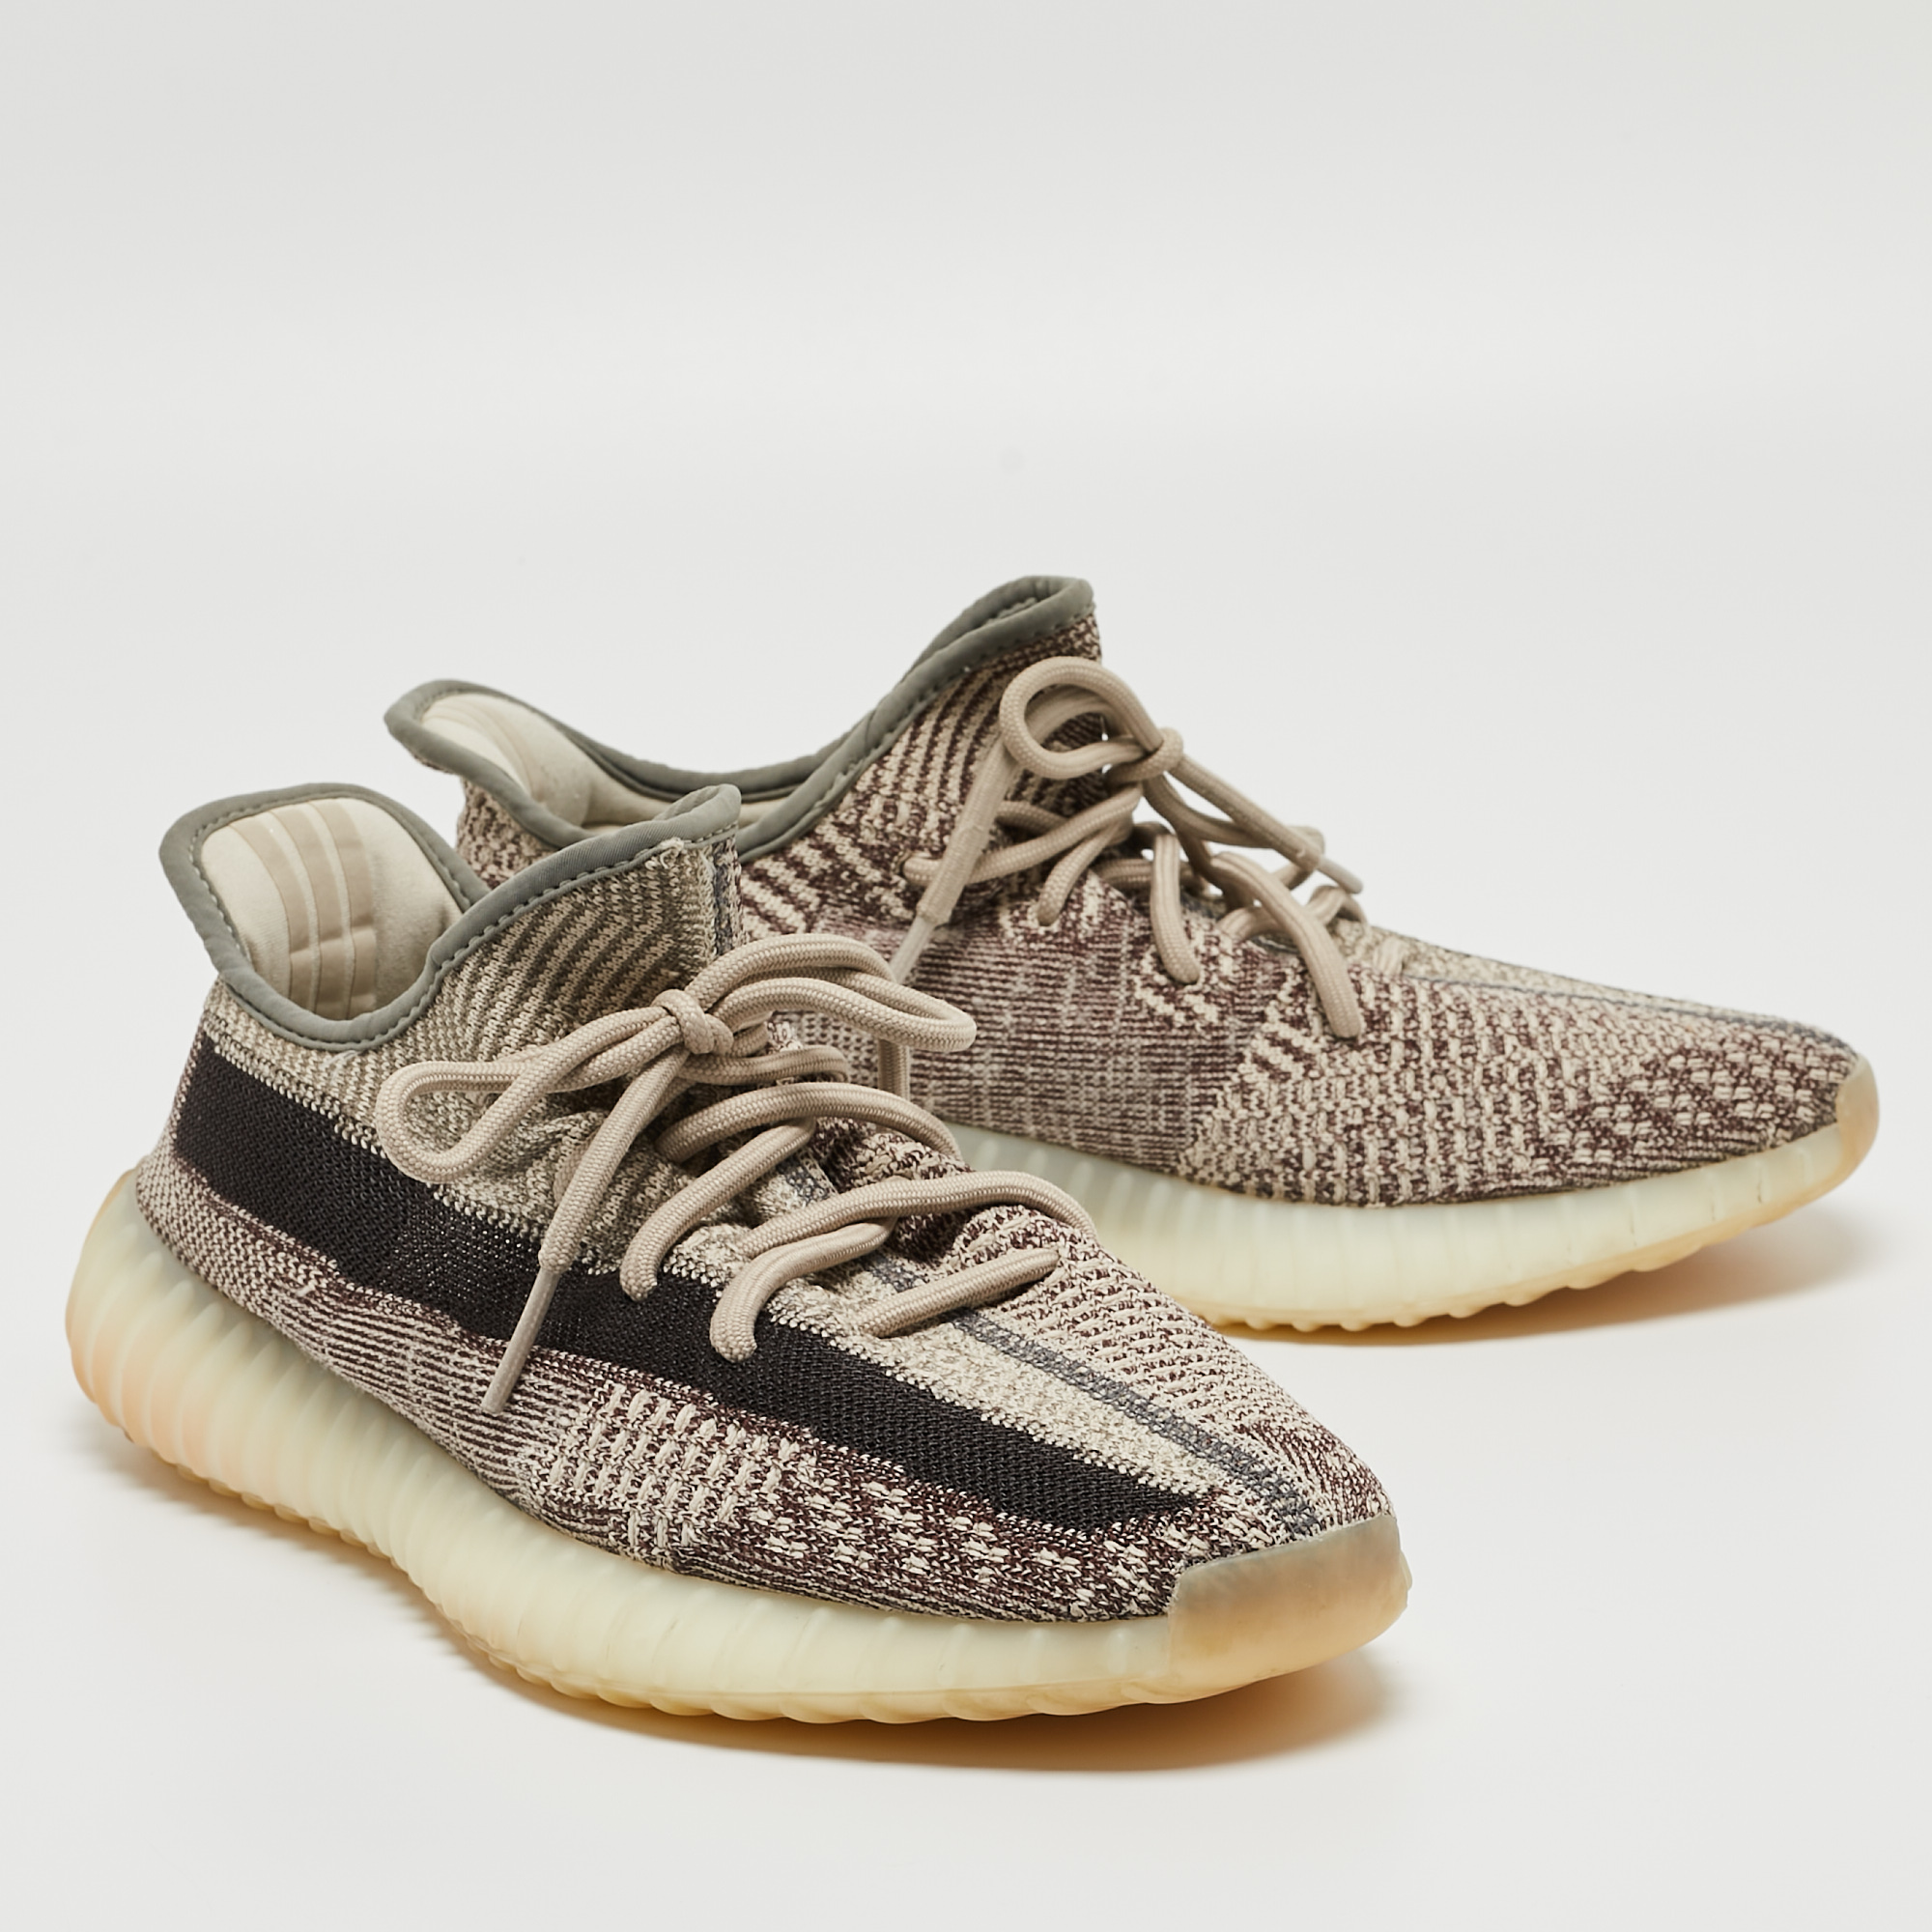 Yeezy X Adidas Beige/Brown Knit Fabric Boost 350 V2 Zyon Sneakers Size 41 1/3